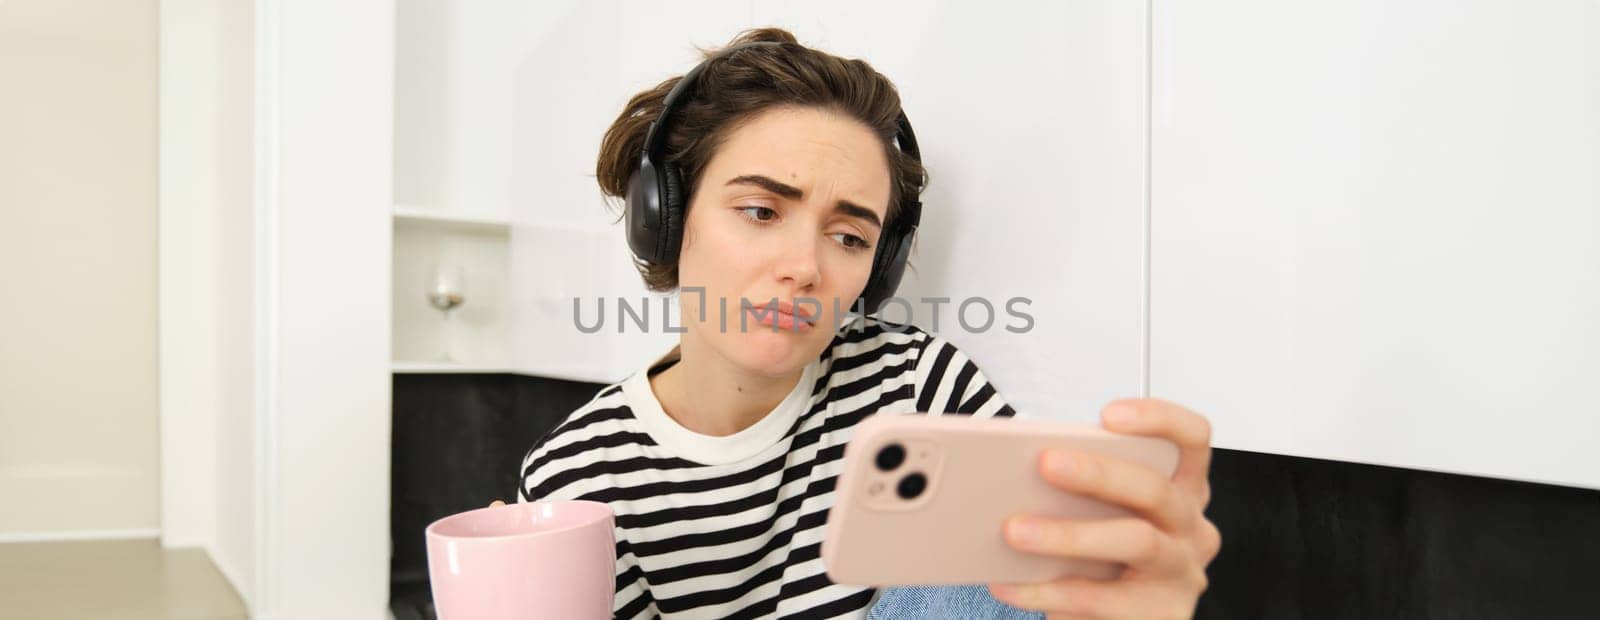 Portrait of woman with sad face, watching something on mobile phone, social media app, drinking tea, wearing wireless headphones.